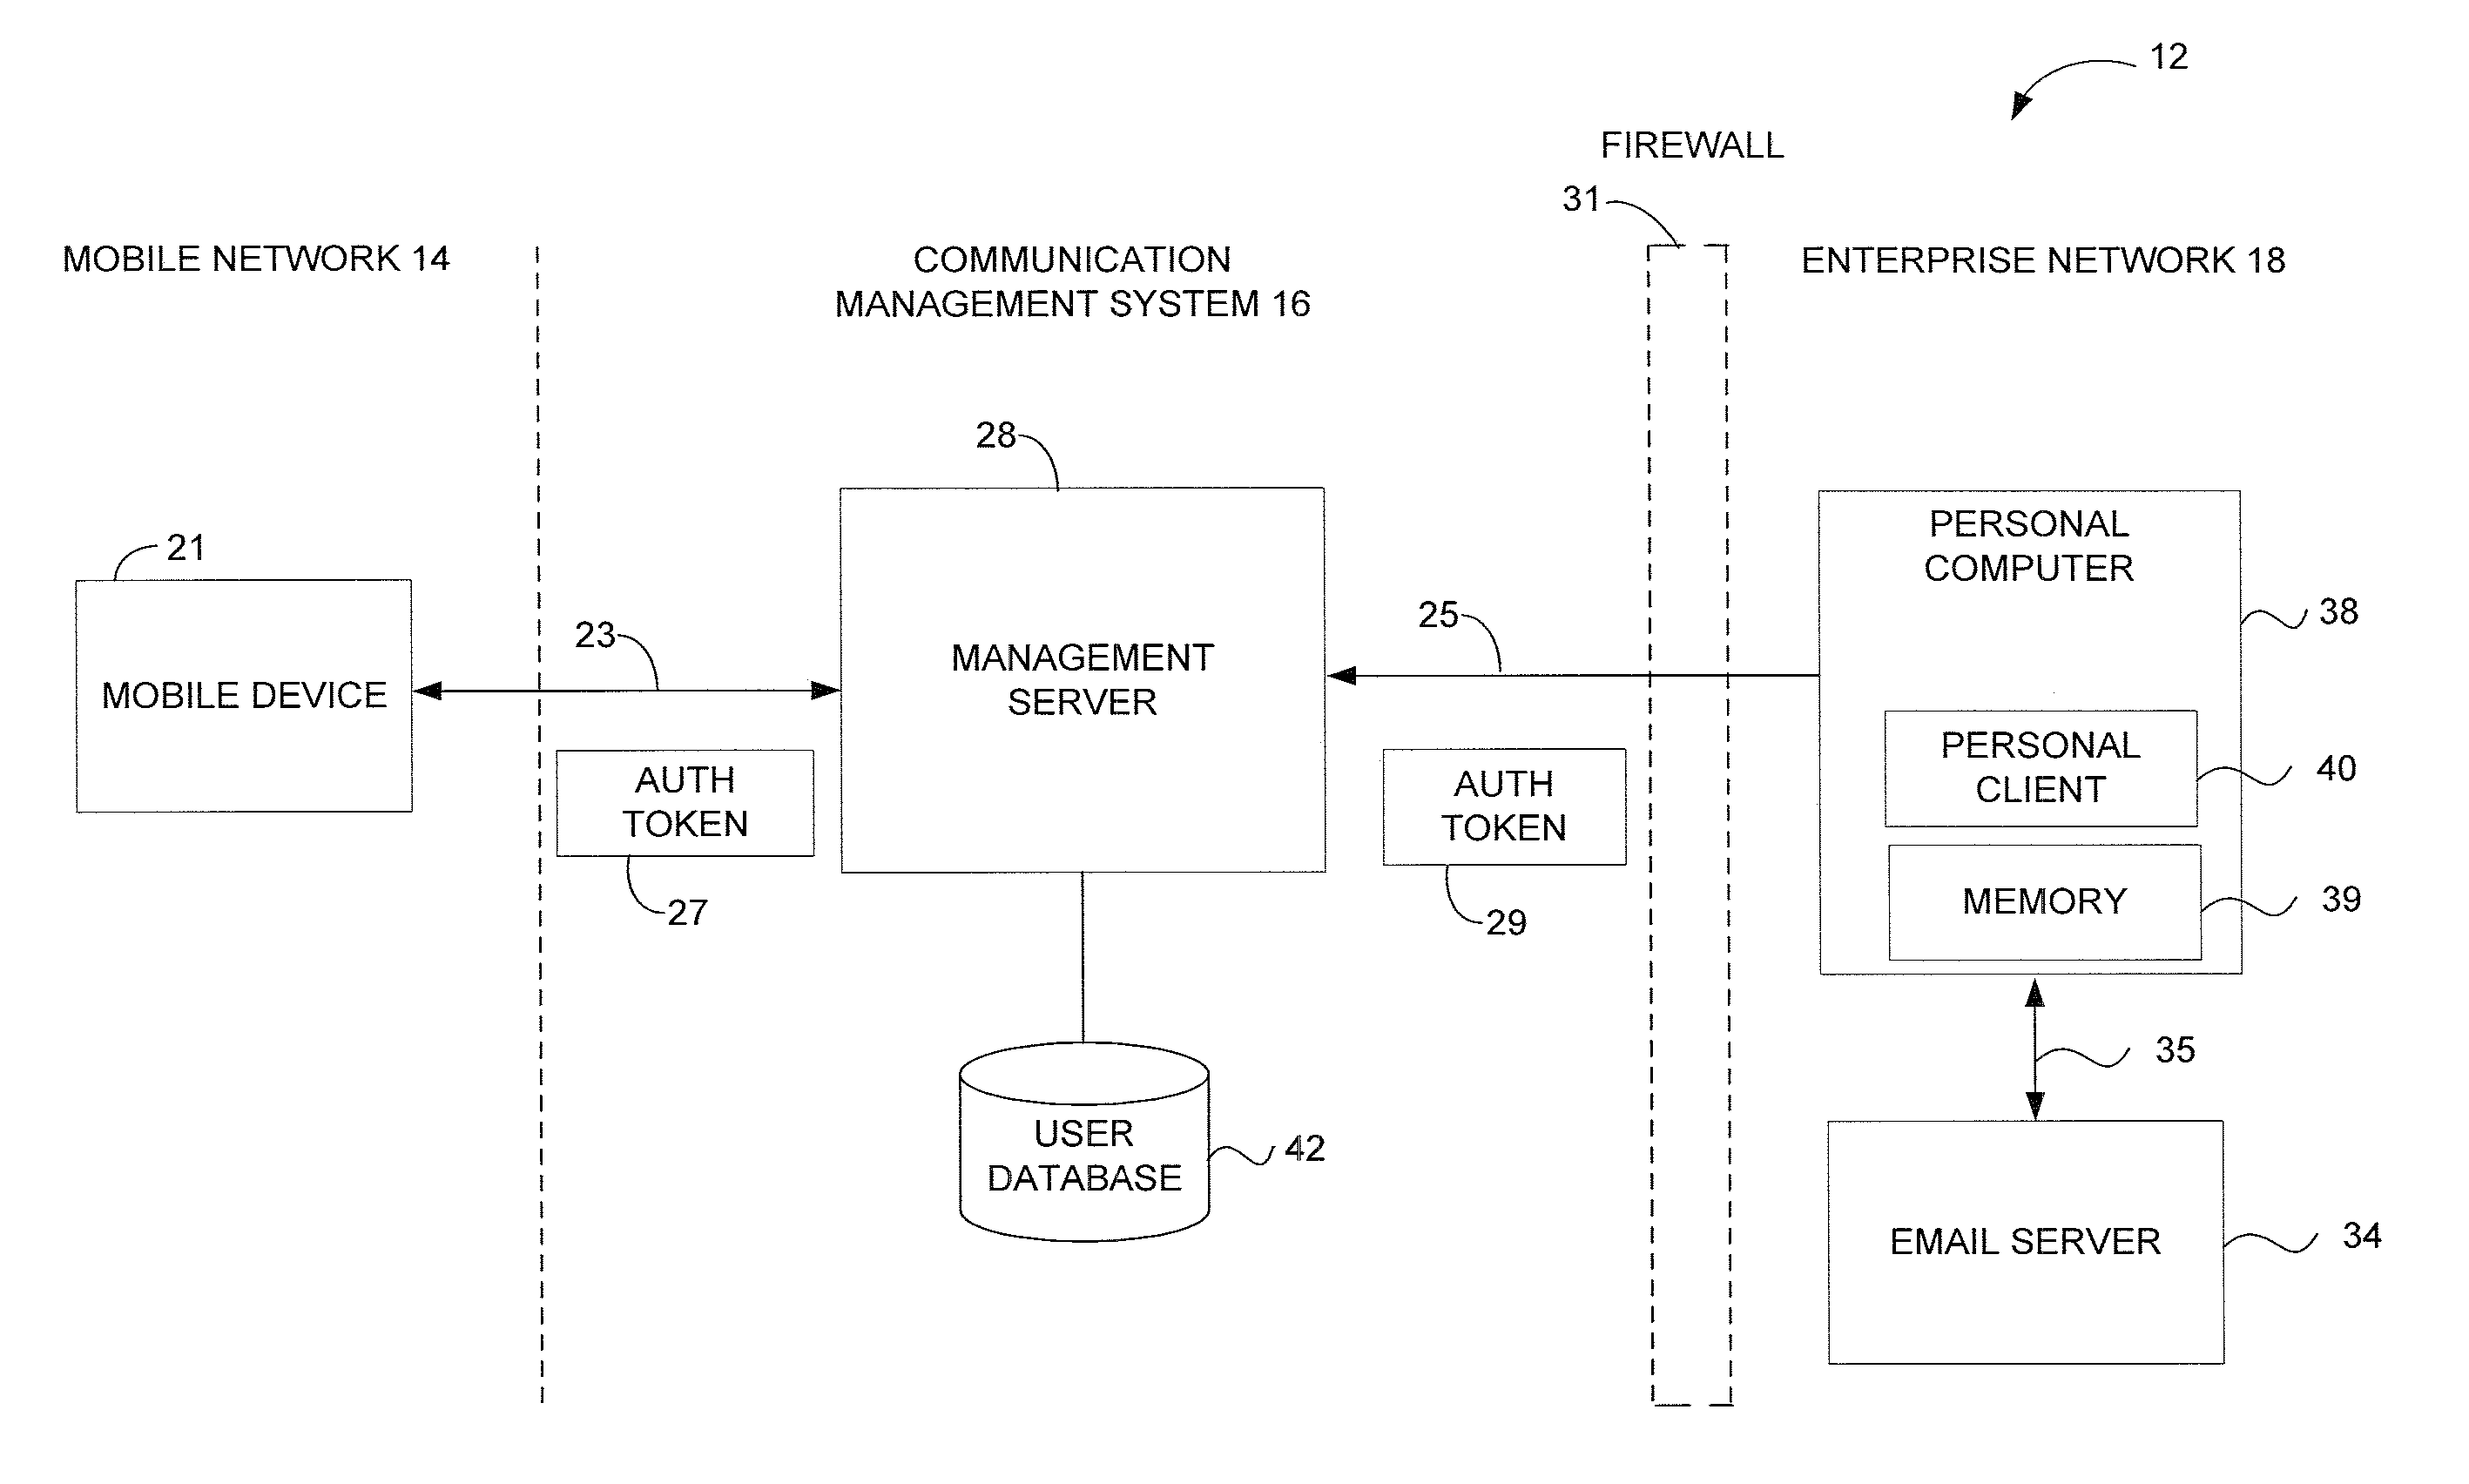 Connection architecture for a mobile network